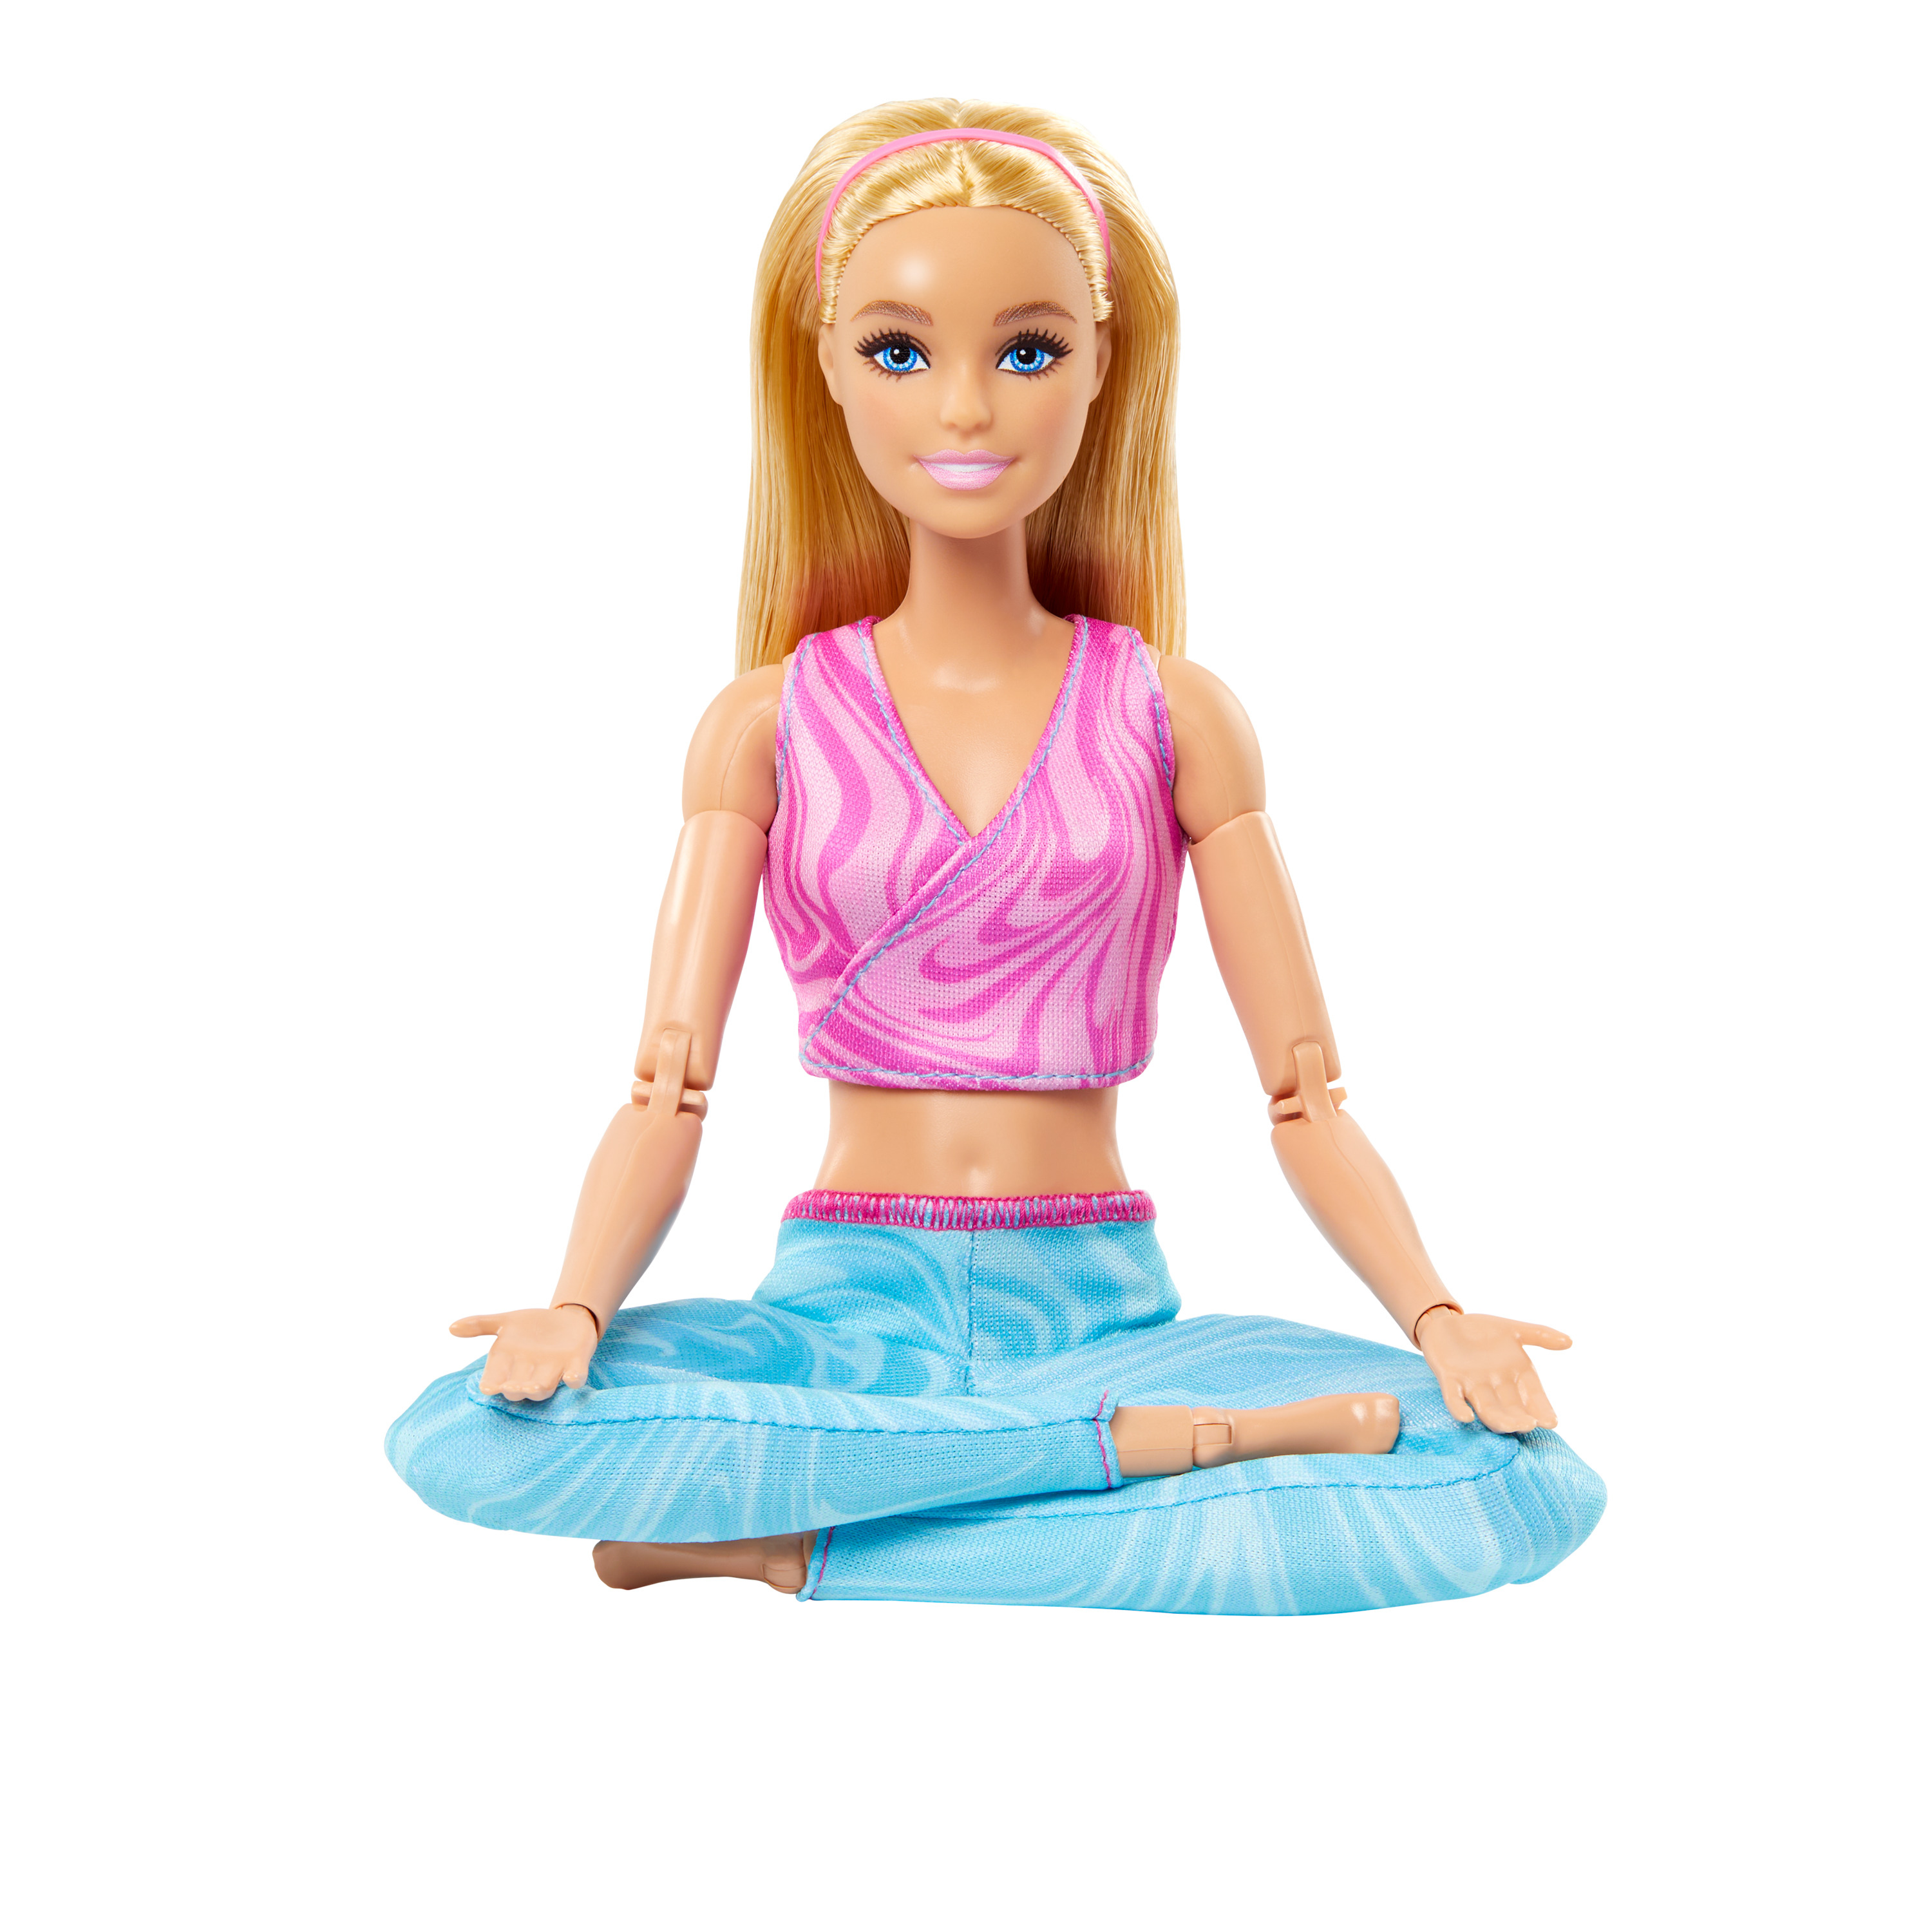 New MTM Yoga Dolls, My new Made to Move Yoga dolls arrived …